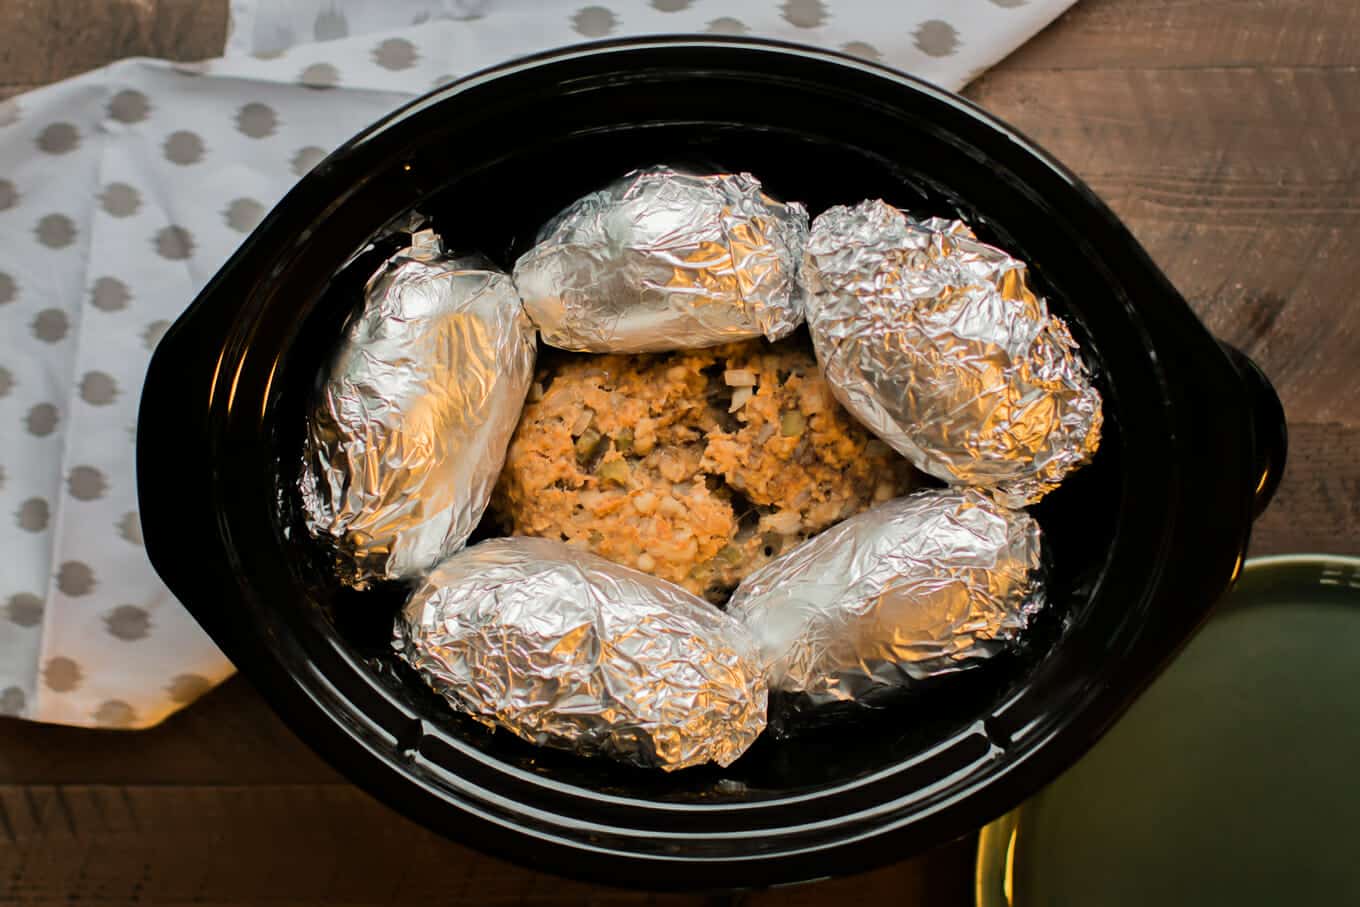 finished cooking meatloaf and baked potatoes in slow cooker